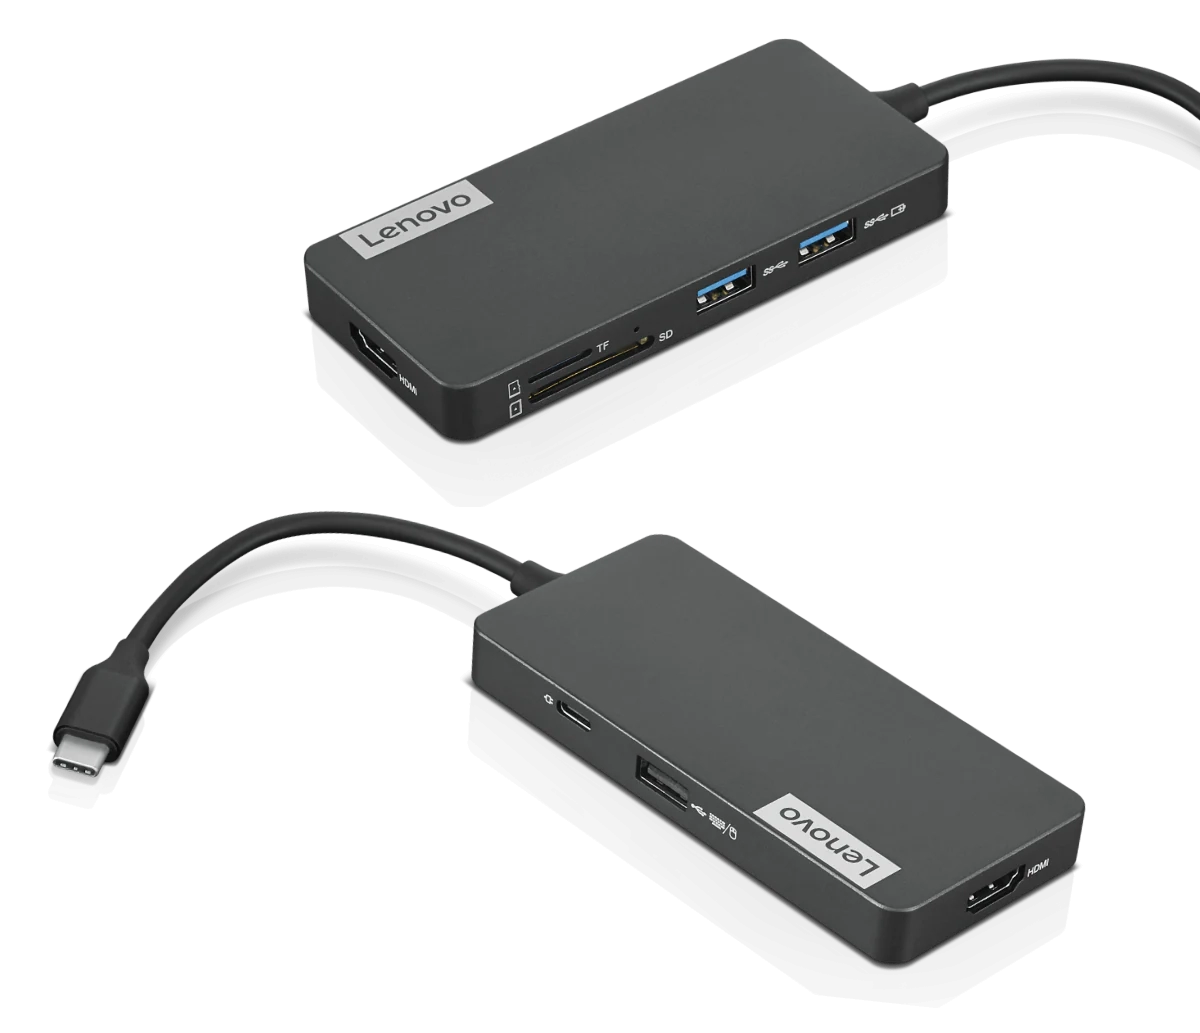 Two Lenovo USB-C 7-in-1 Hubs showing ports on front, rear, and left sides.